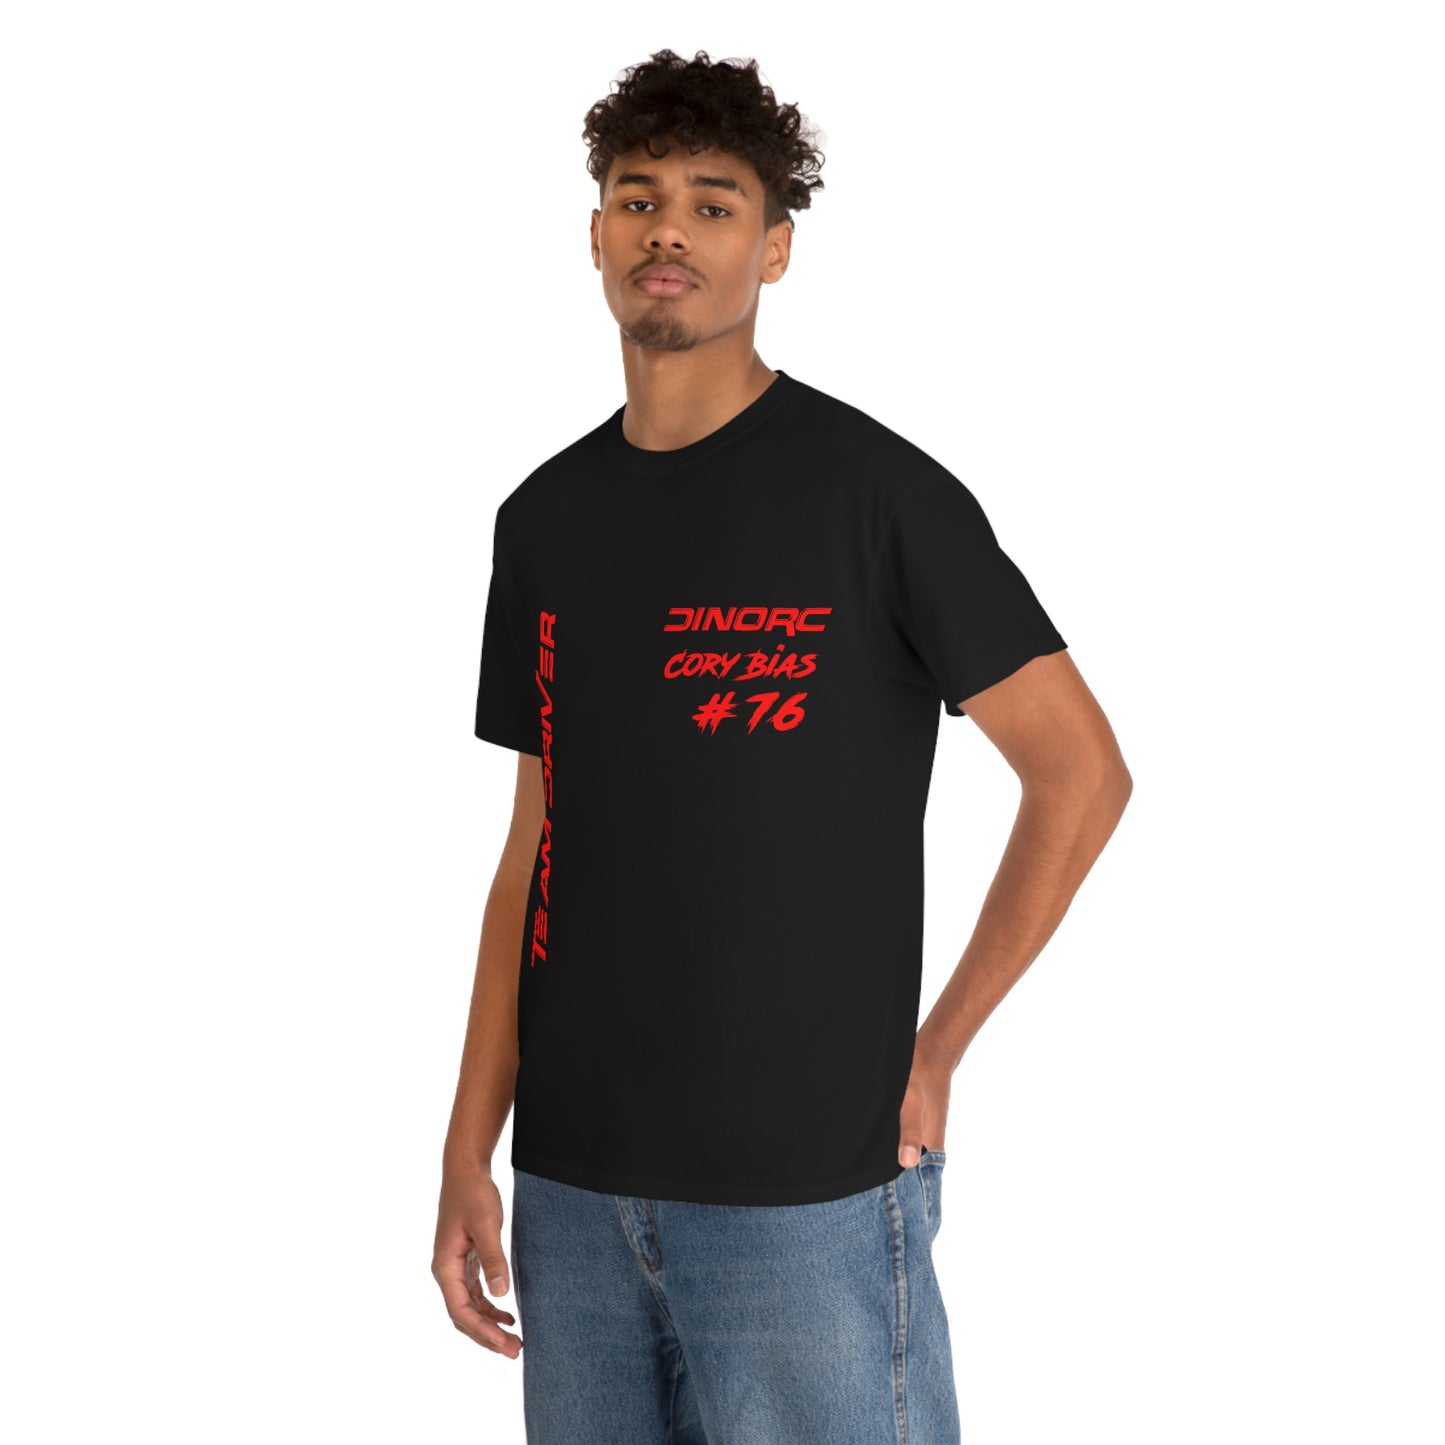 Team Driver Cory Bias Front and Back DinoRc Logo T-Shirt S-5x 5 colors